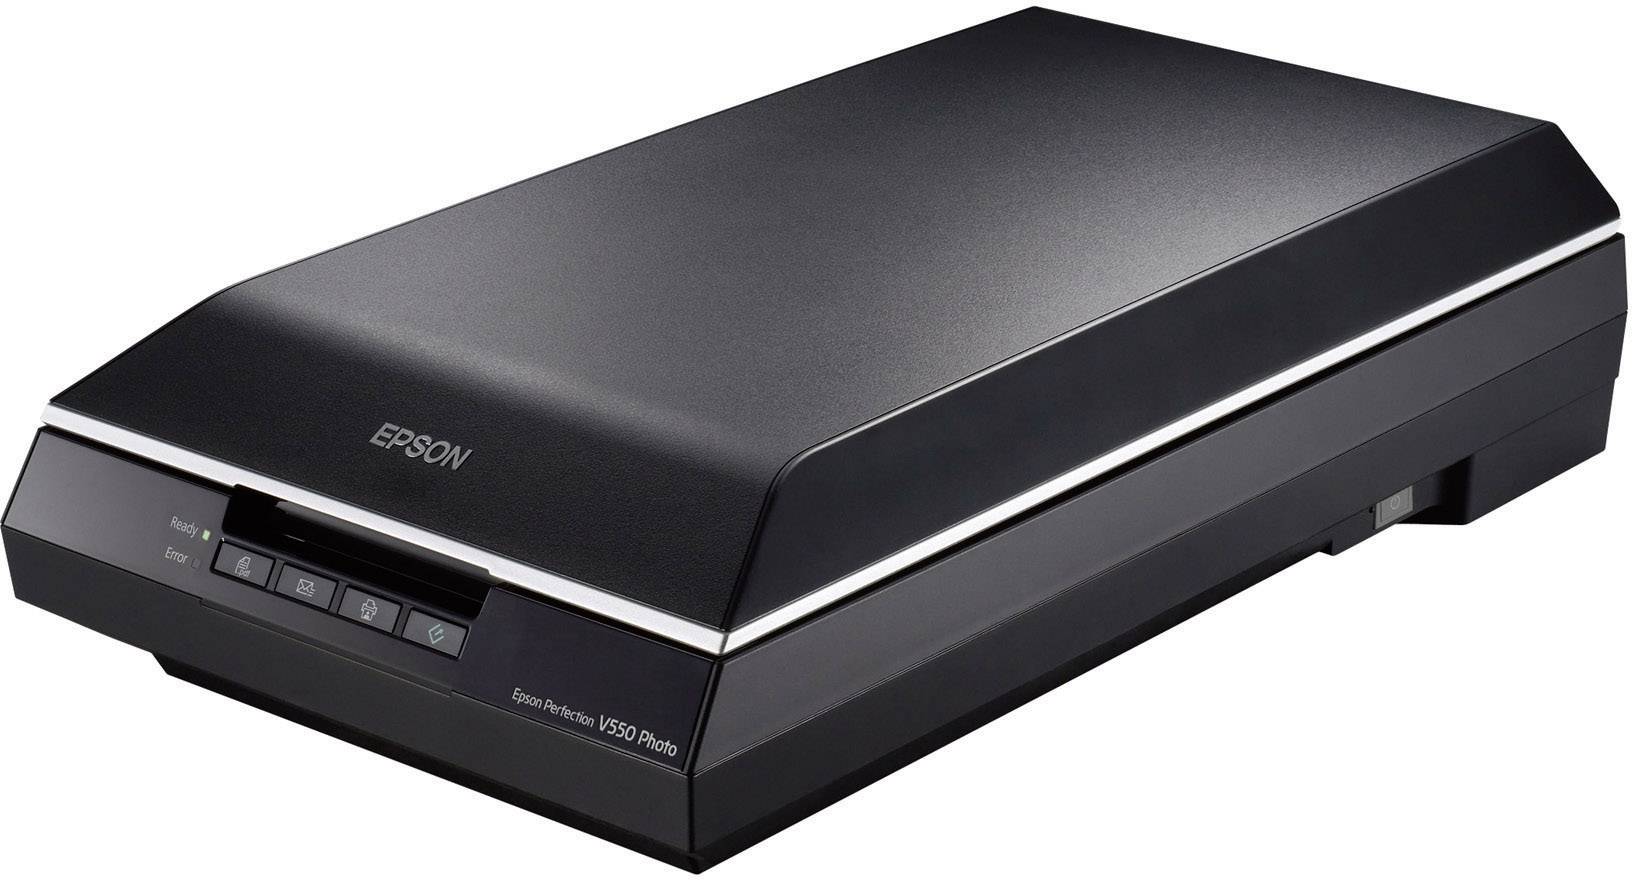 epson perfection v500 photo scanner software for windows 10